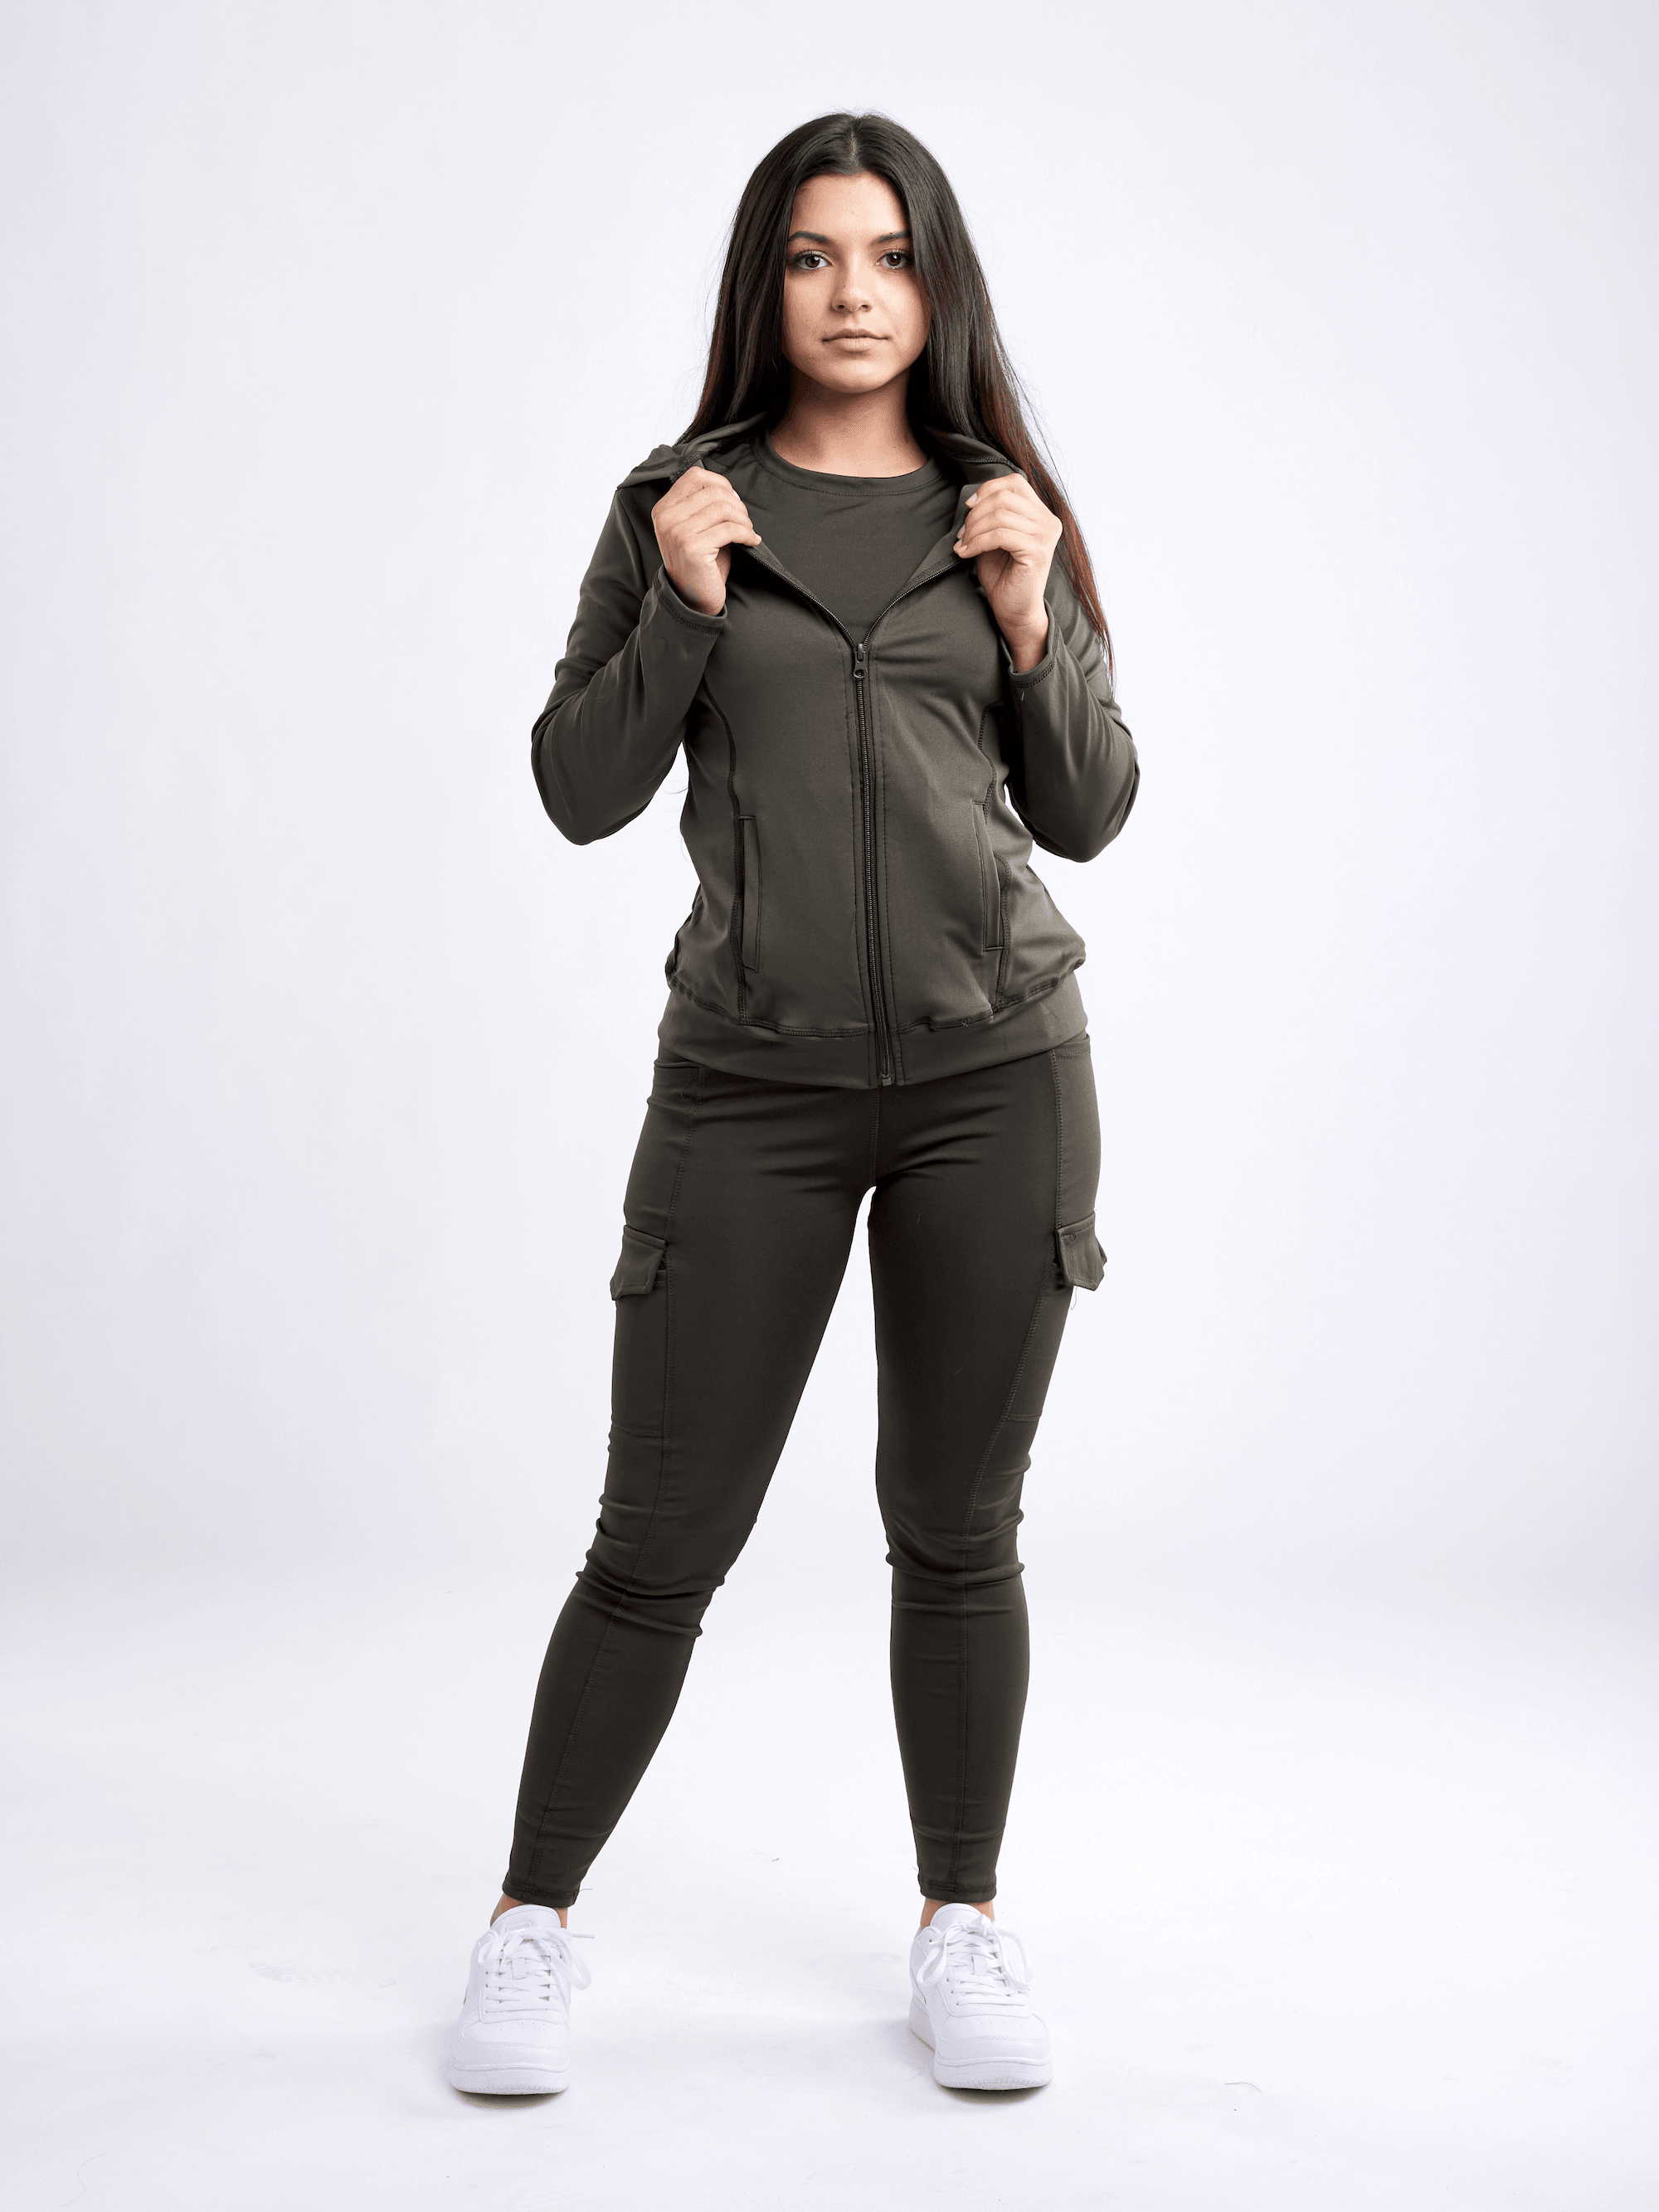 Athletic Fitted Zip-Up Hoodie Jacket with Pockets - VirtuousWares:Global